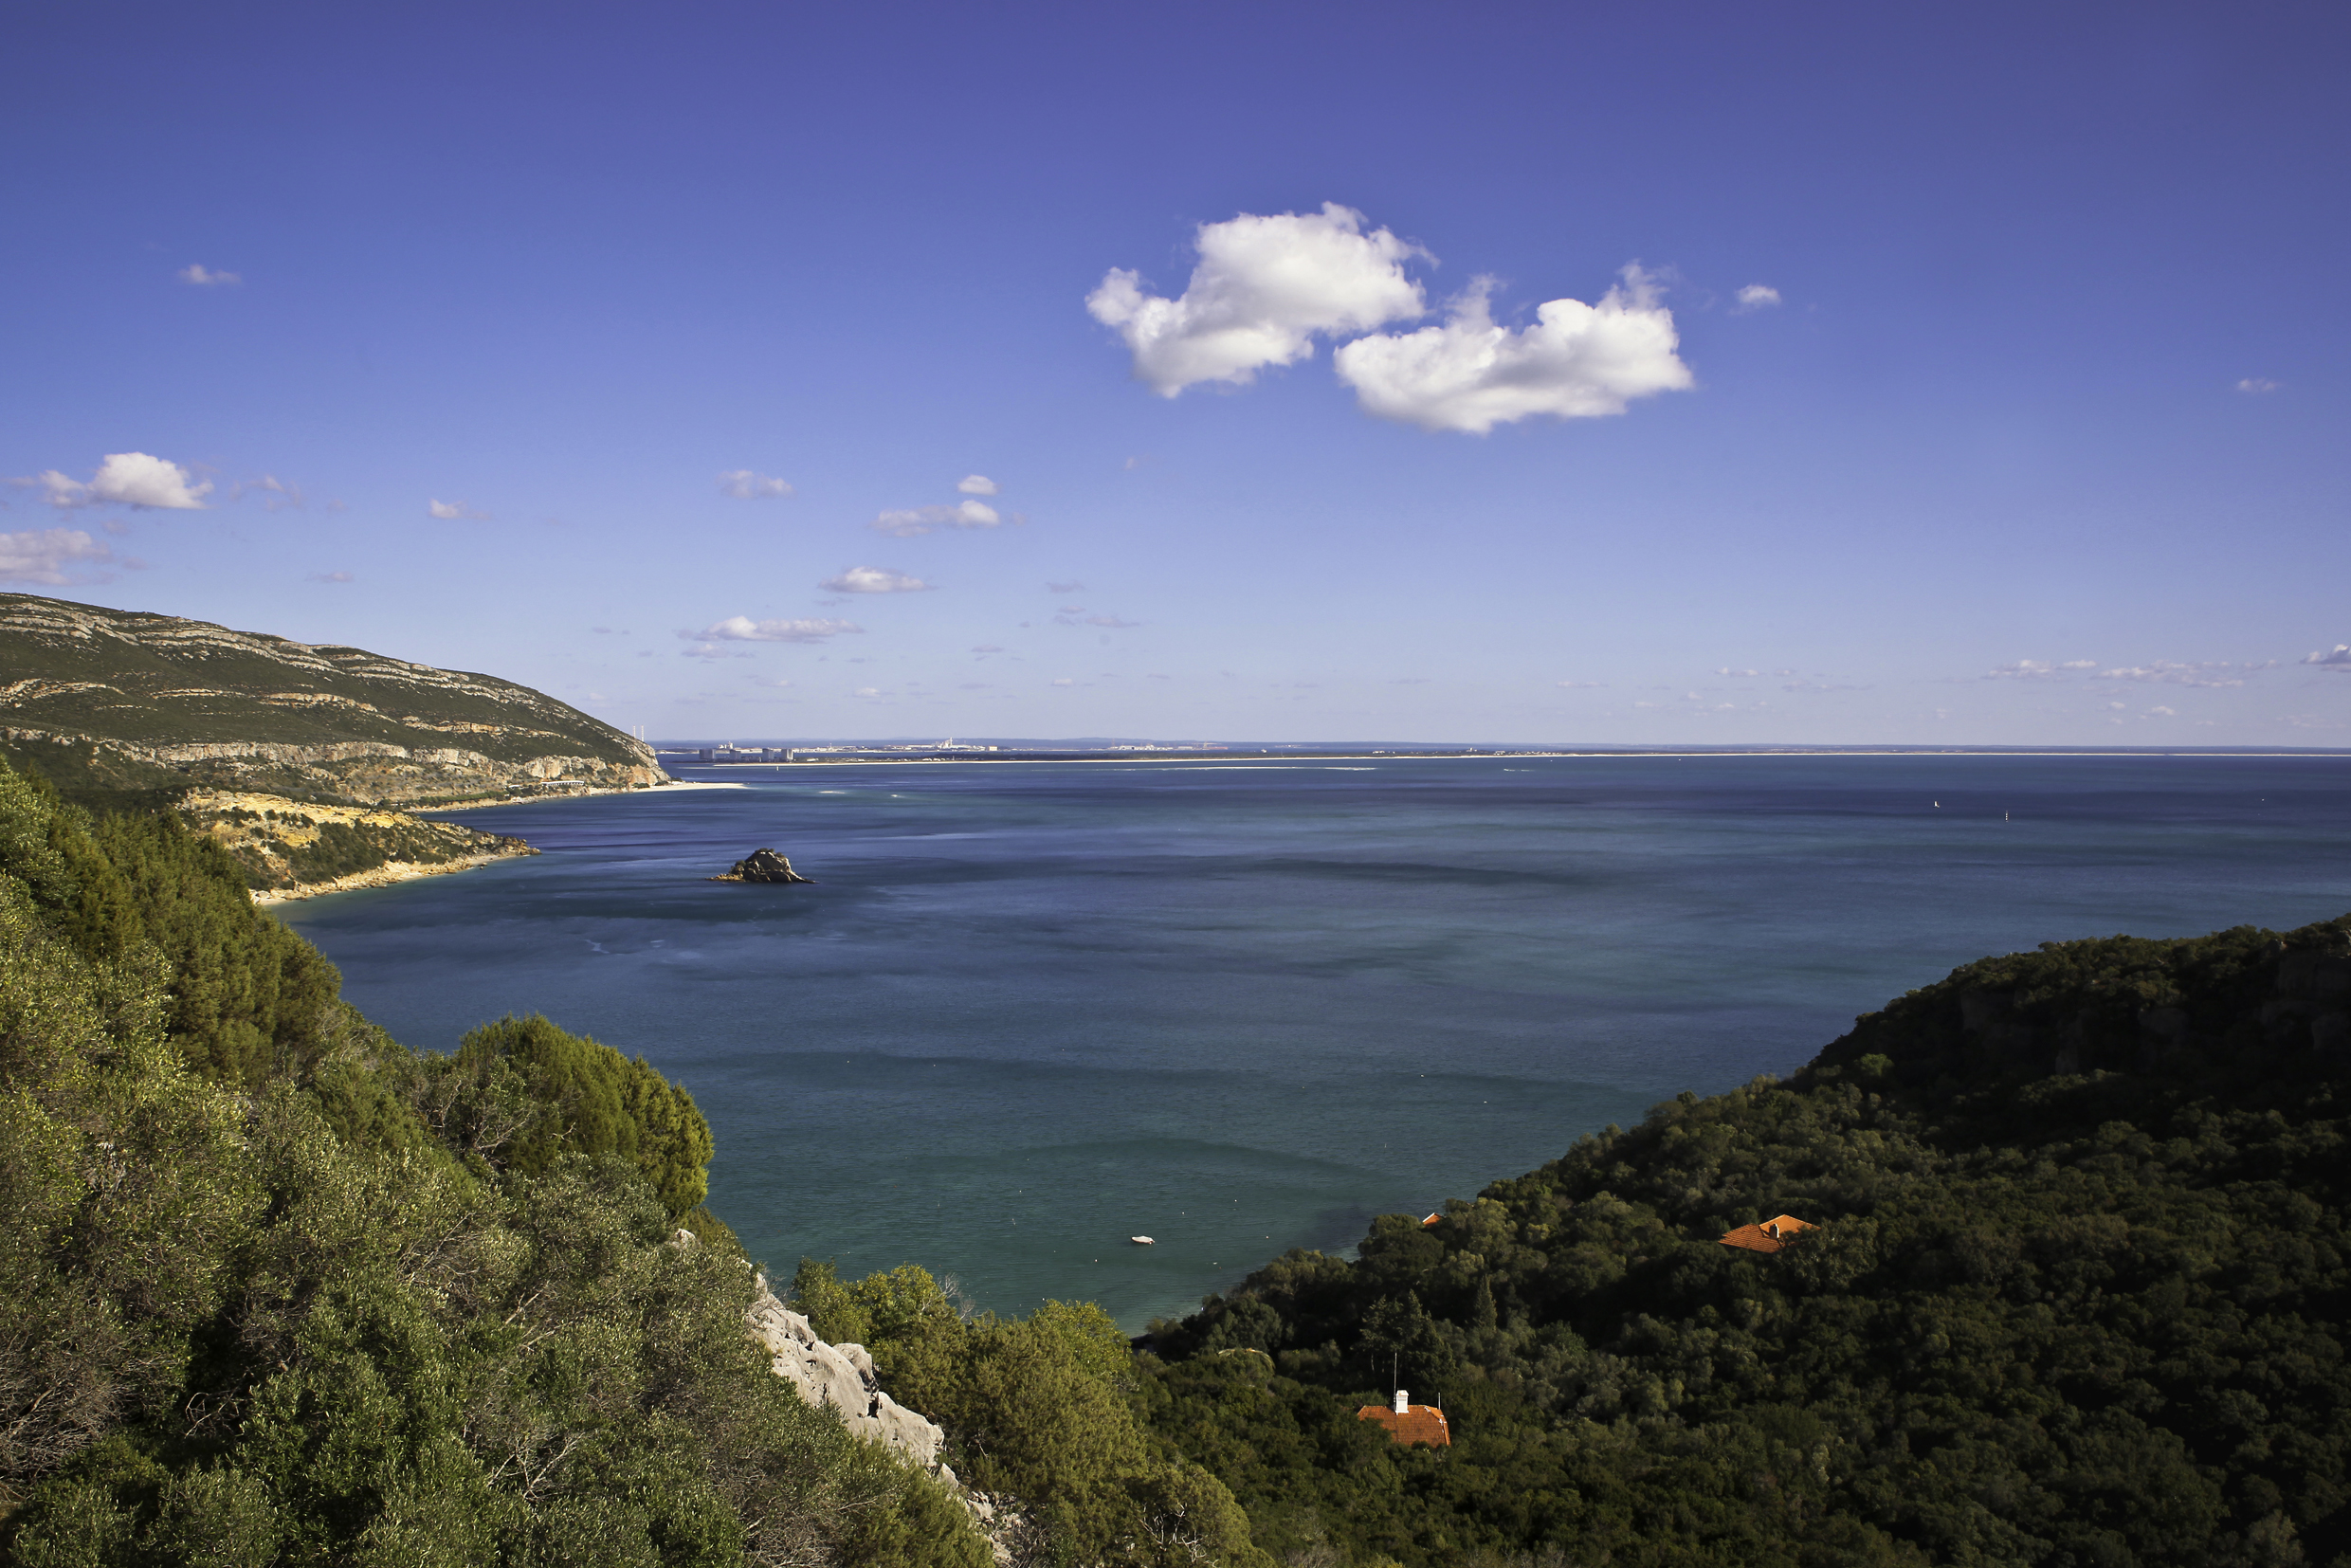 A bay, viewed from wooded hills. Small slivers of beaches are visible along the cliffs to the left of the bay. Red tiled roofs poke through the tree cover in two places. The water is clear, and there are a handful of small clouds in the sky.